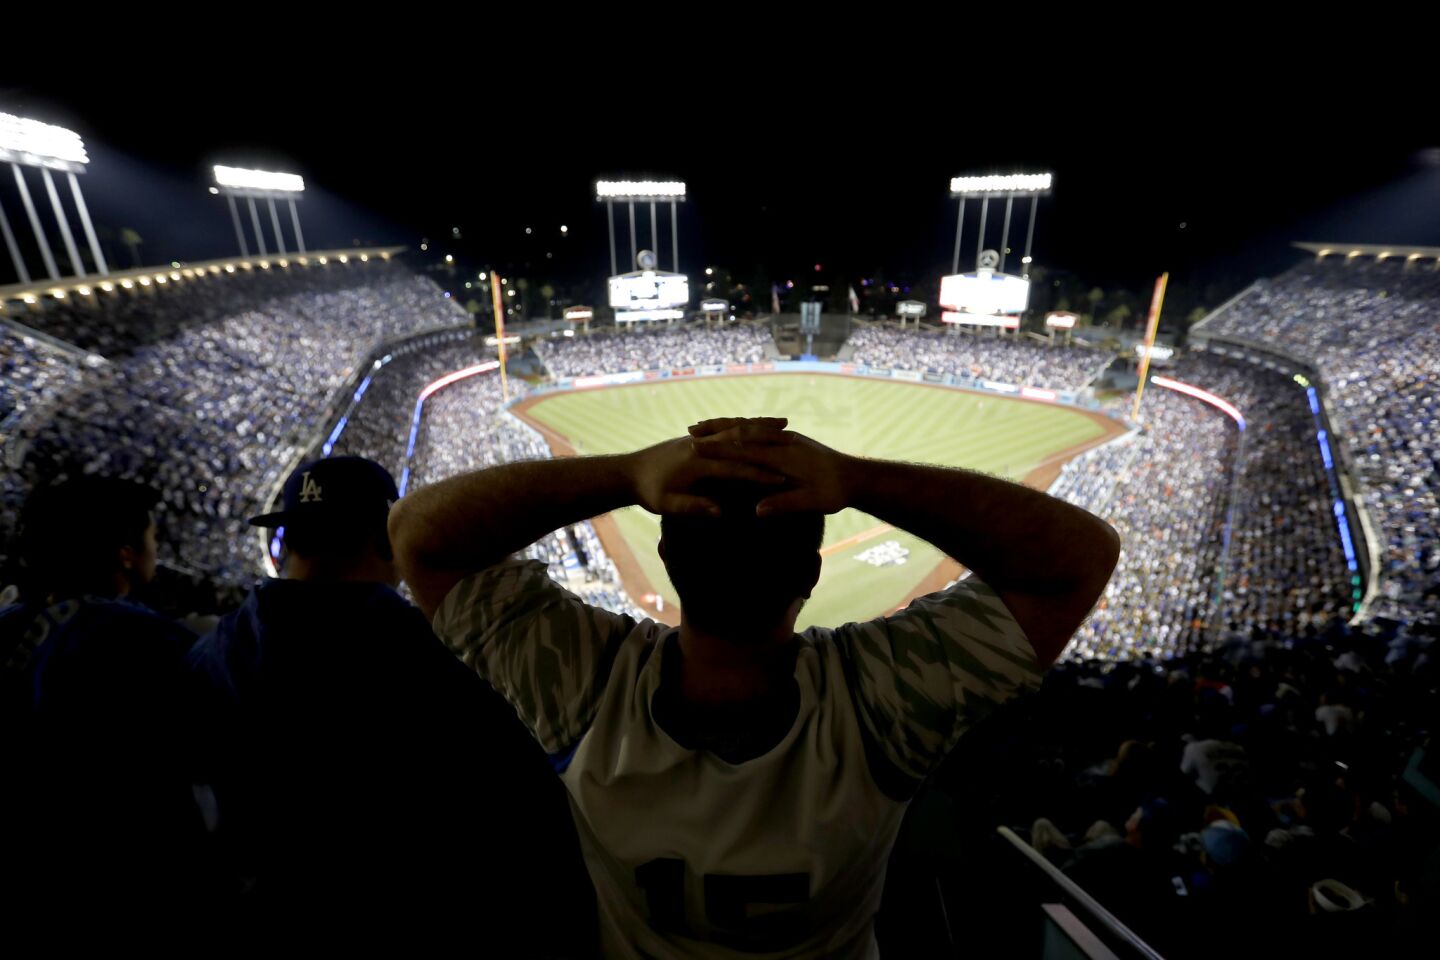 A frustrated Dodgers fan watches the game in the fifth inning.